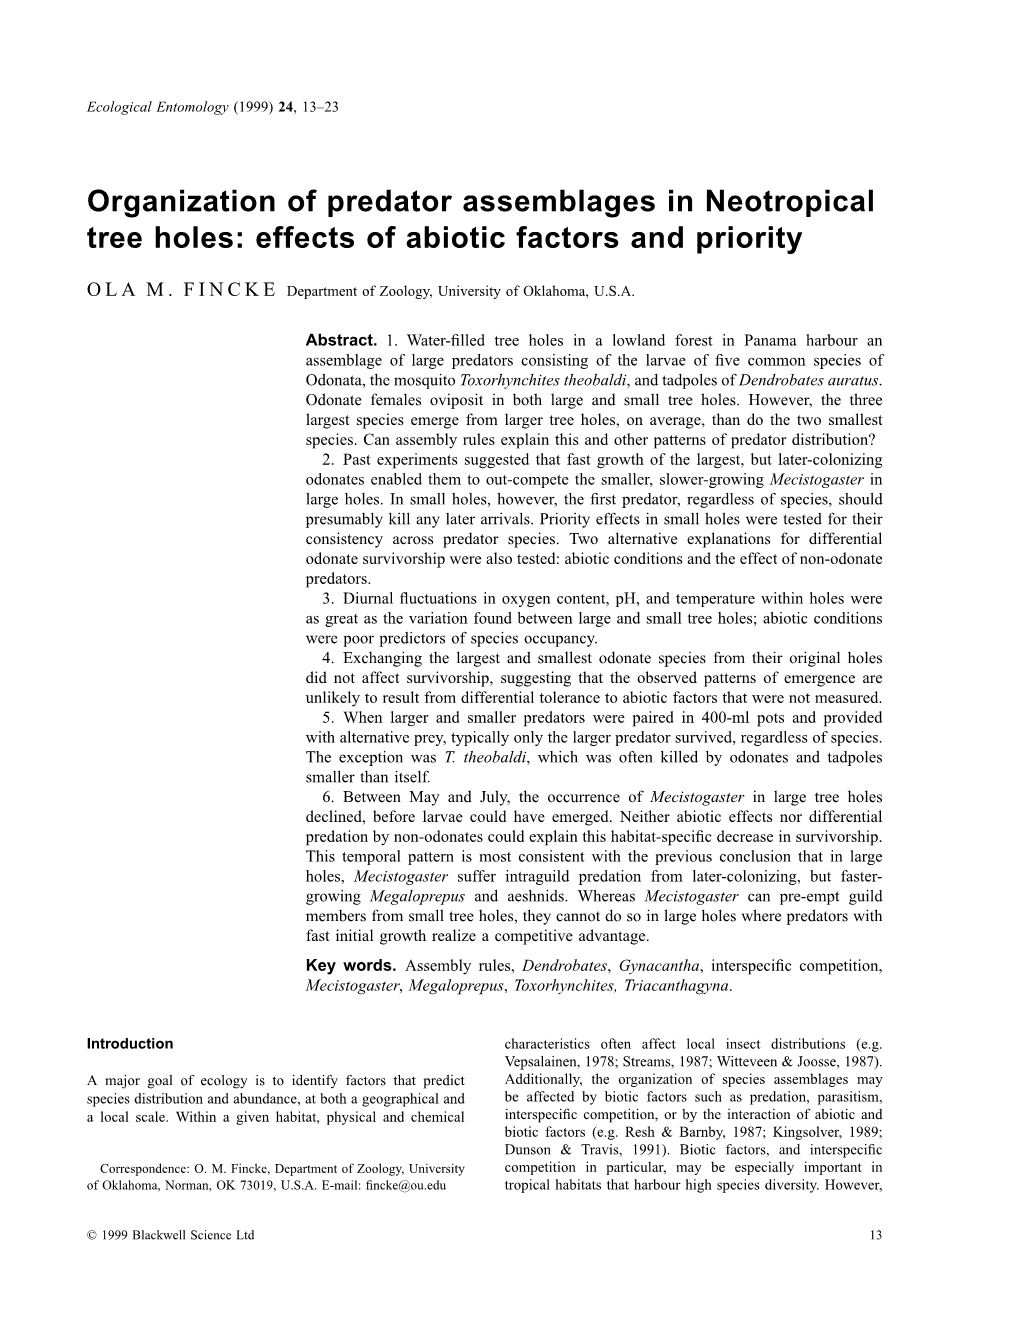 Organization of Predator Assemblages in Neotropical Tree Holes: Effects of Abiotic Factors and Priority